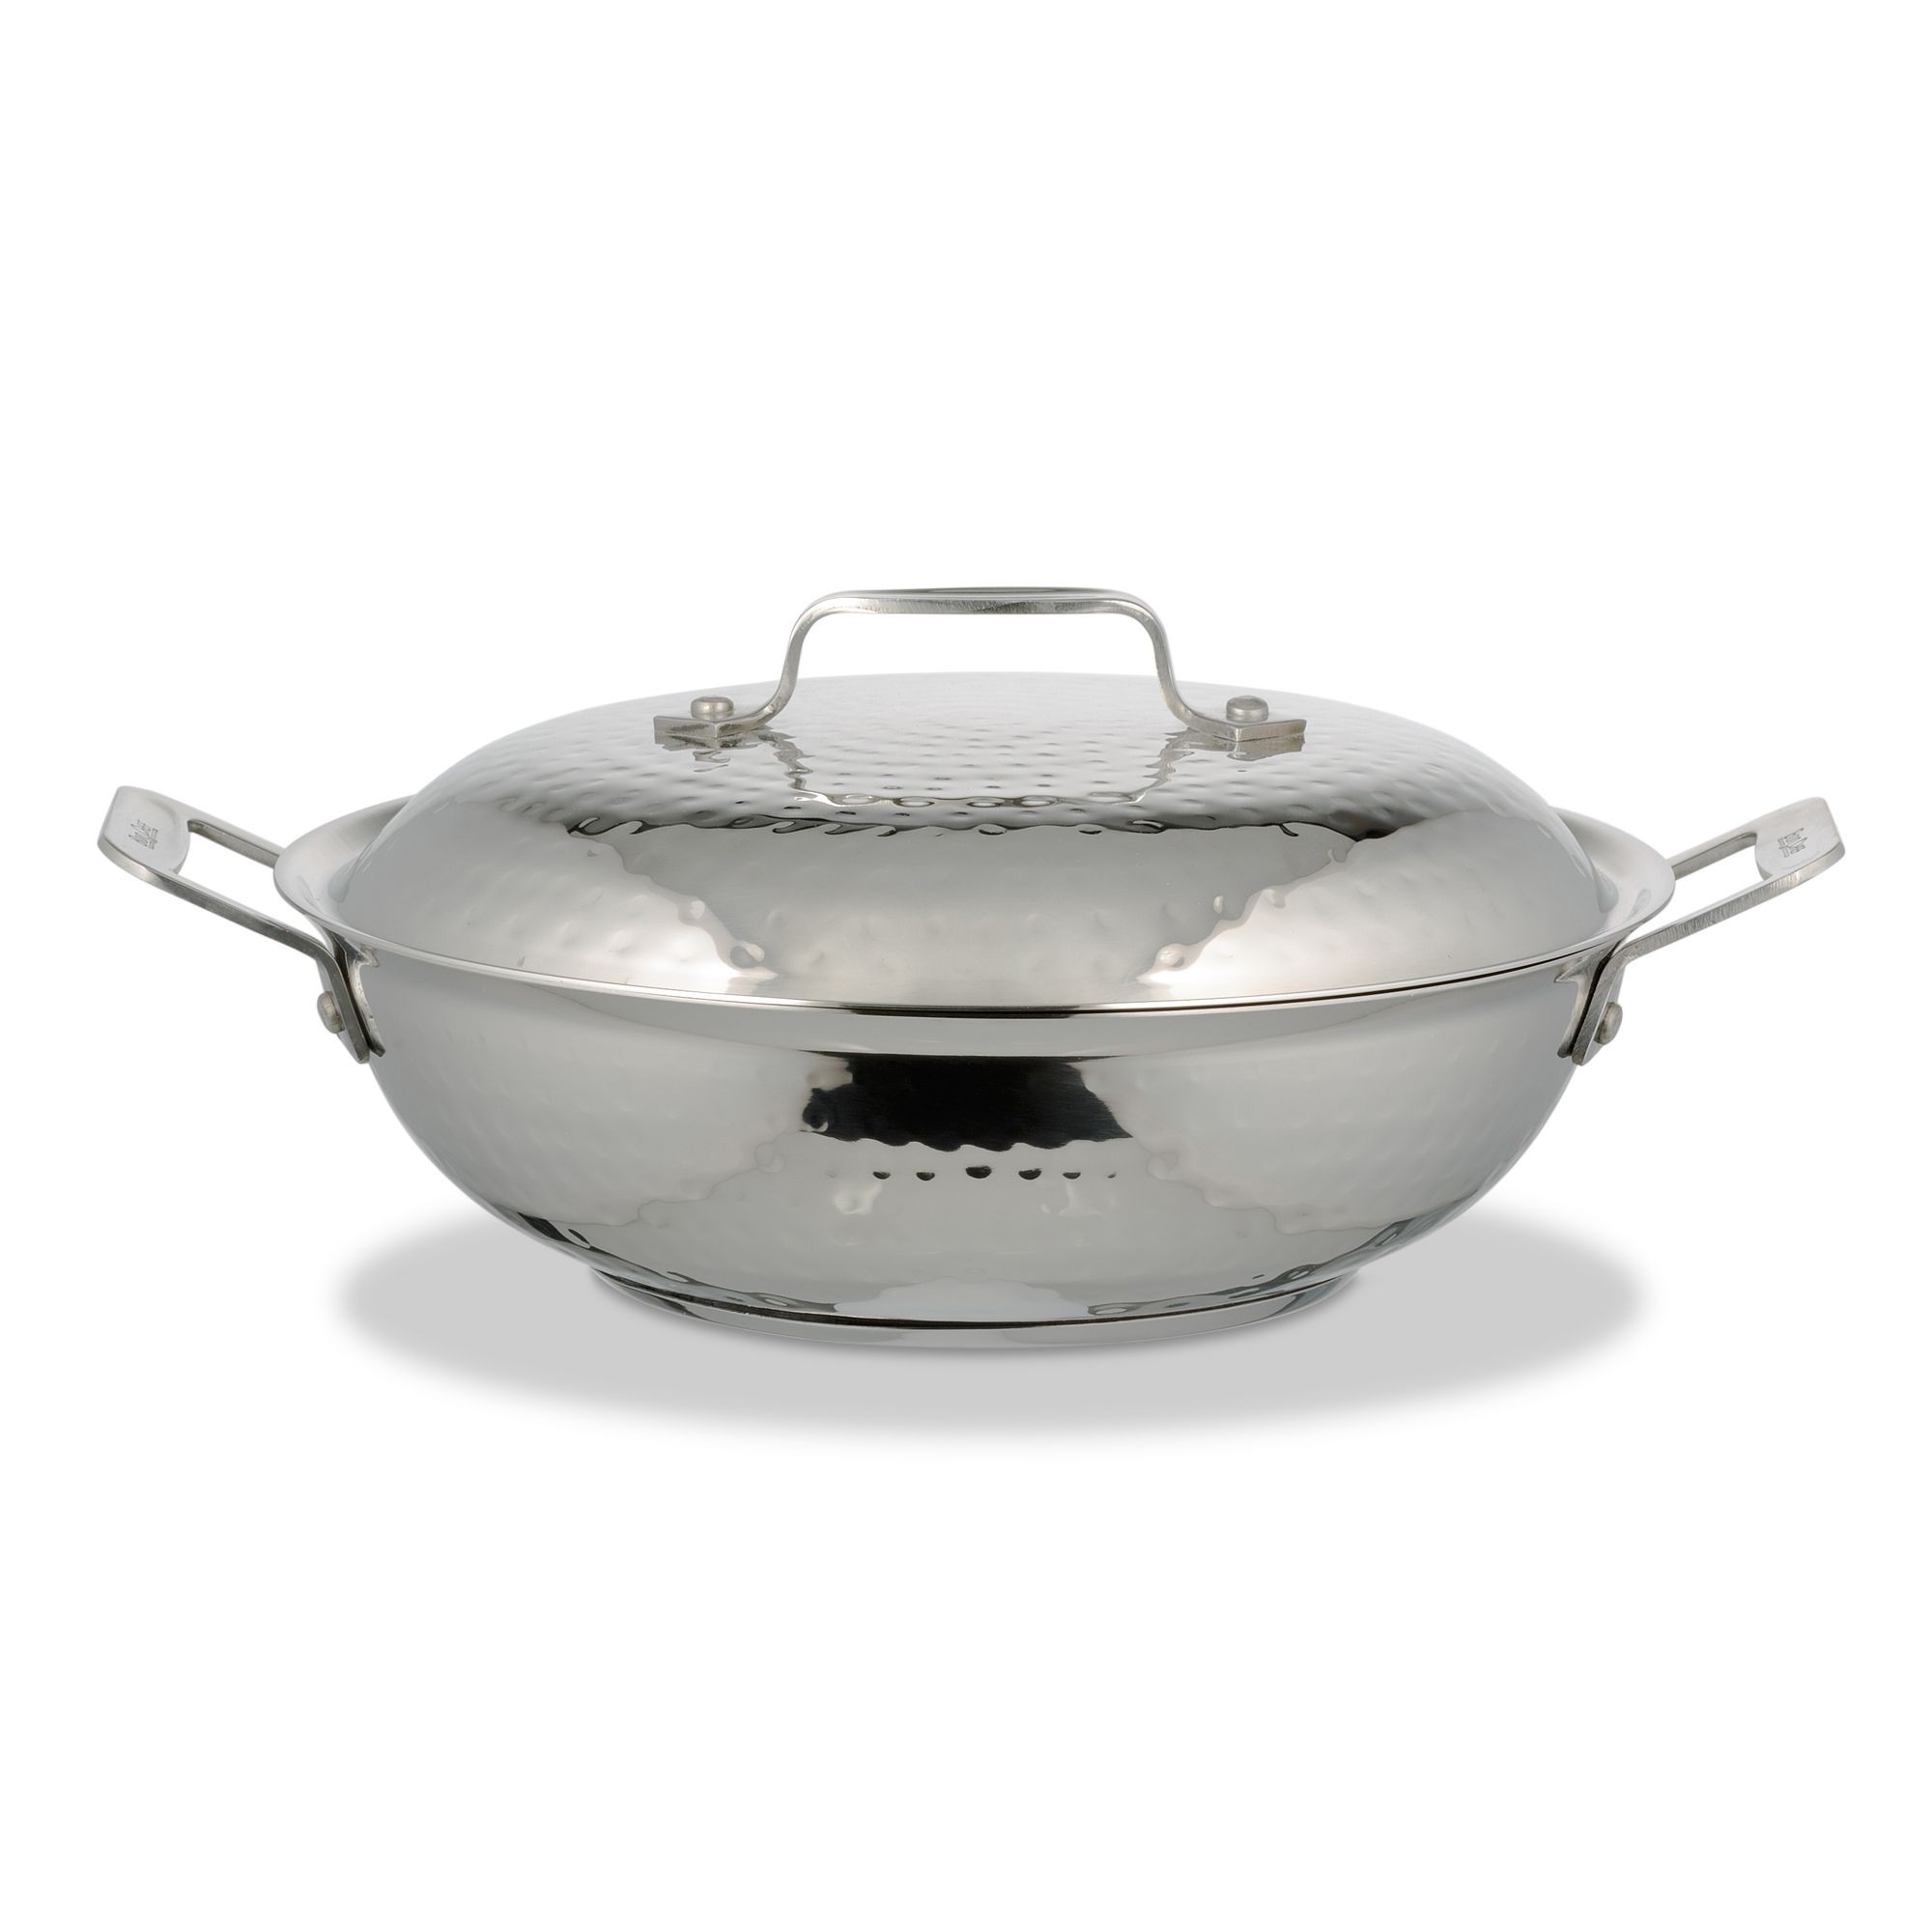 Bon Chef 60011HF Cucina Stainless Steel Braiser Pan with Lid, Hammered Finish, 2 Qt.